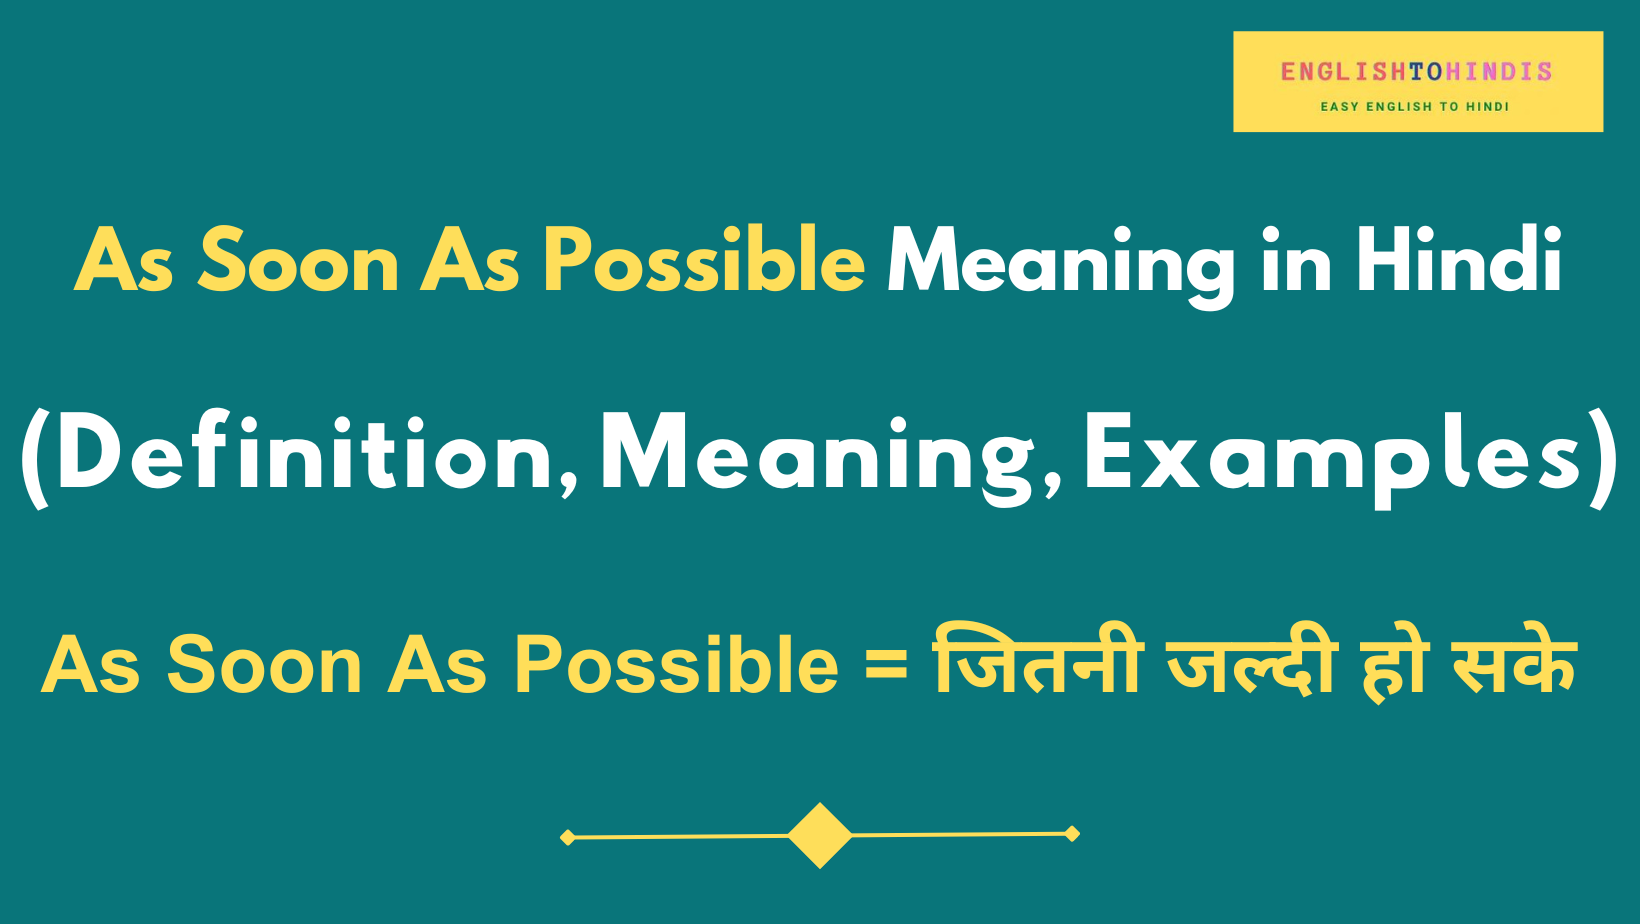 As Soon As Possible Meaning in Hindi